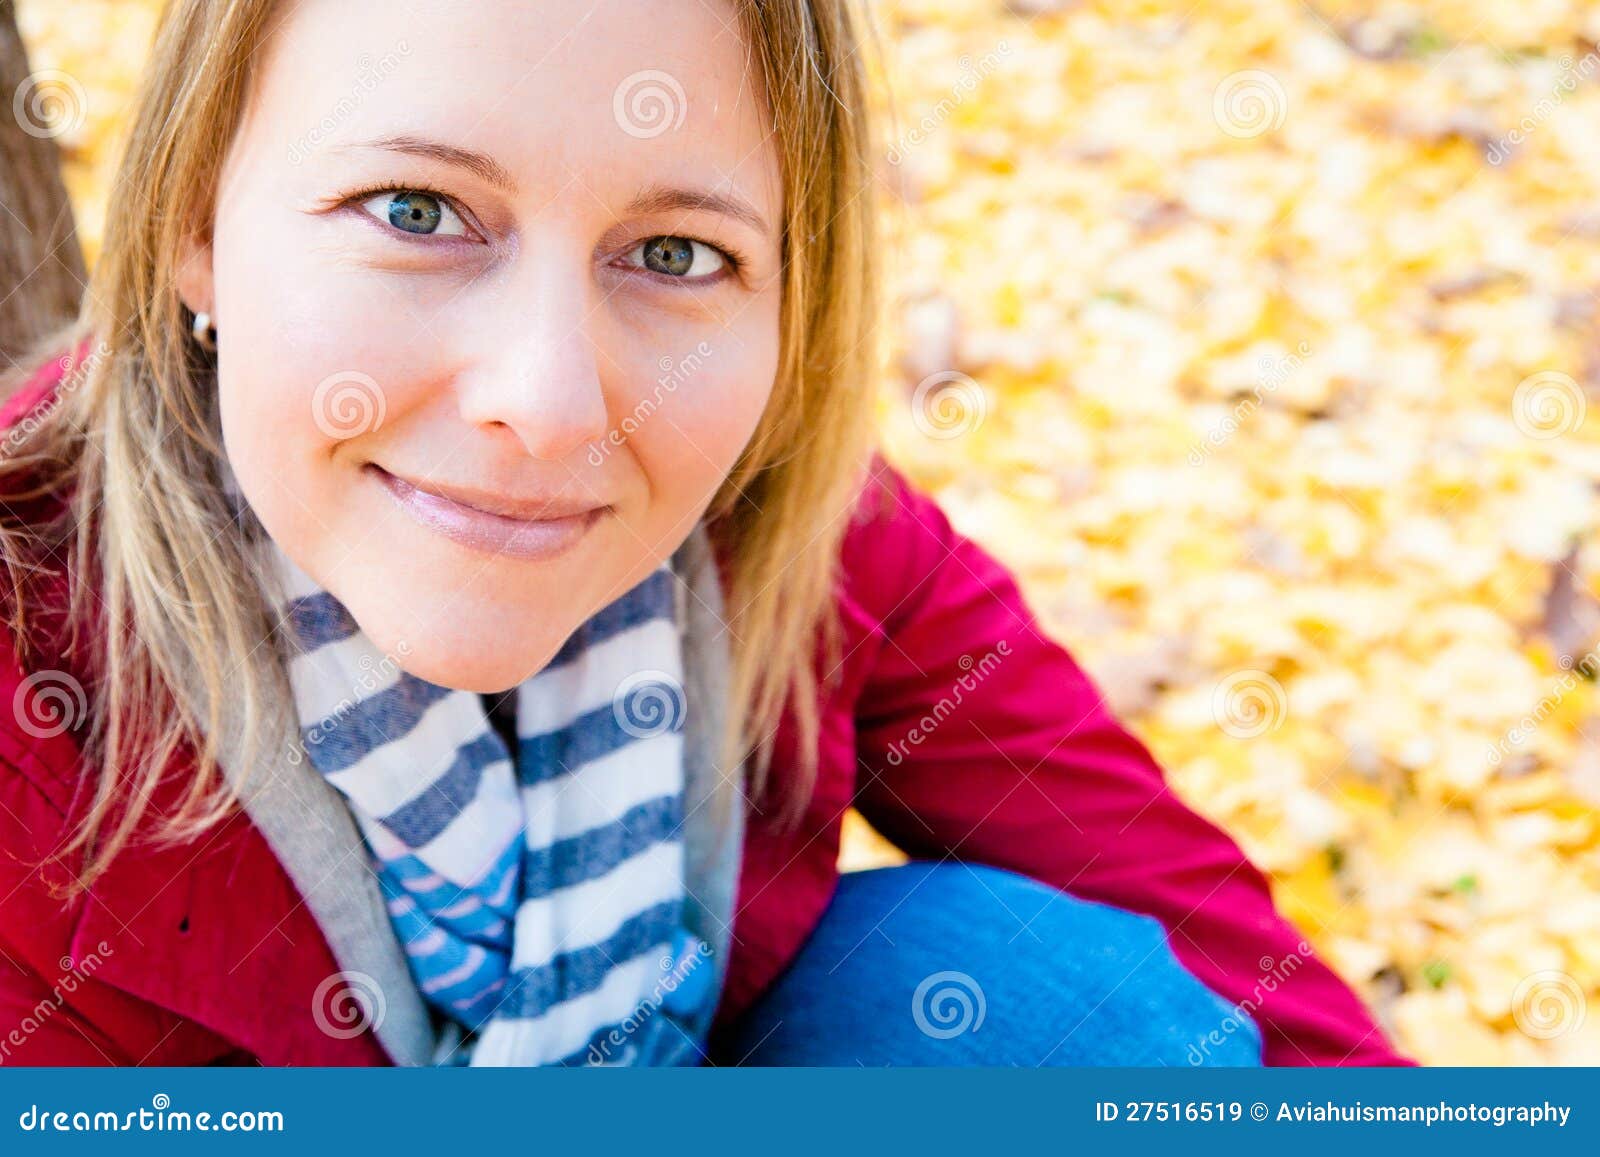 Happiness is Beautiful stock image. Image of face, calm - 27516519